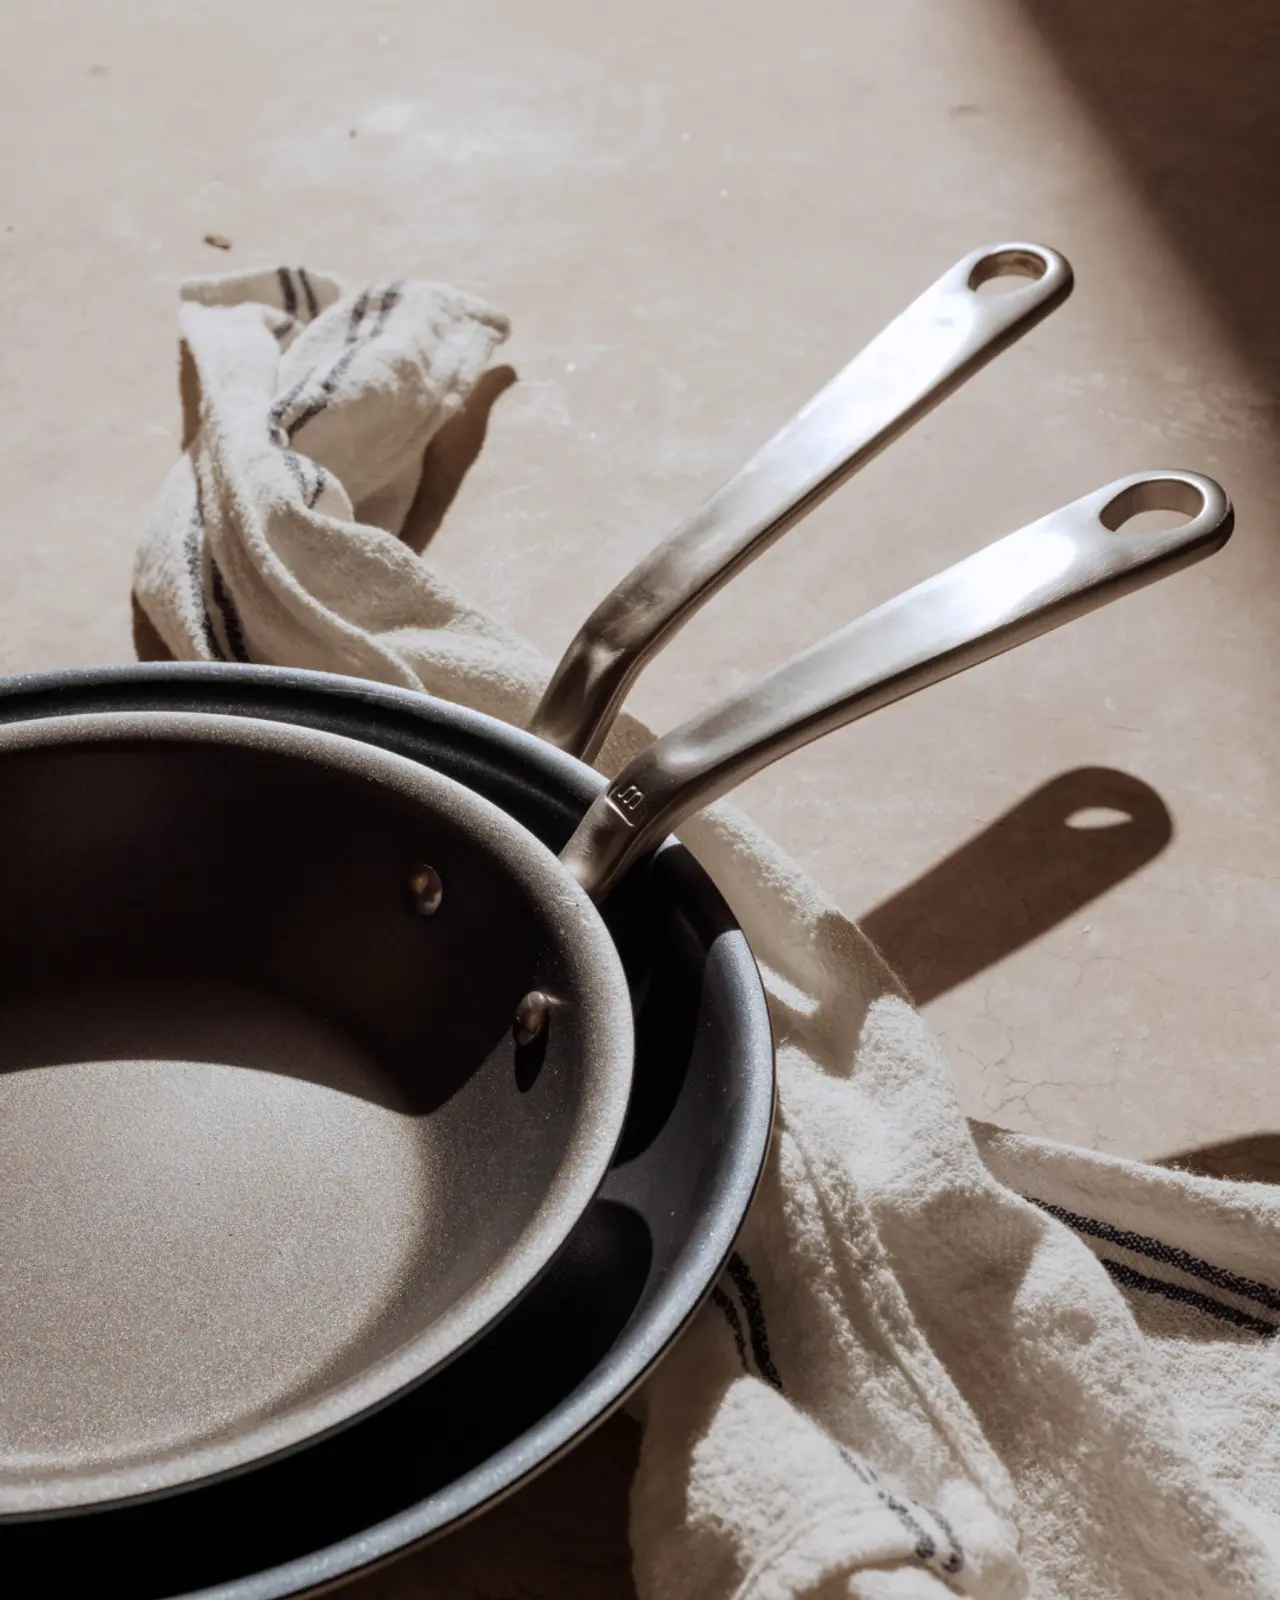 Two frying pans with stainless steel handles rest on a dishtowel on a textured surface, casting soft shadows.